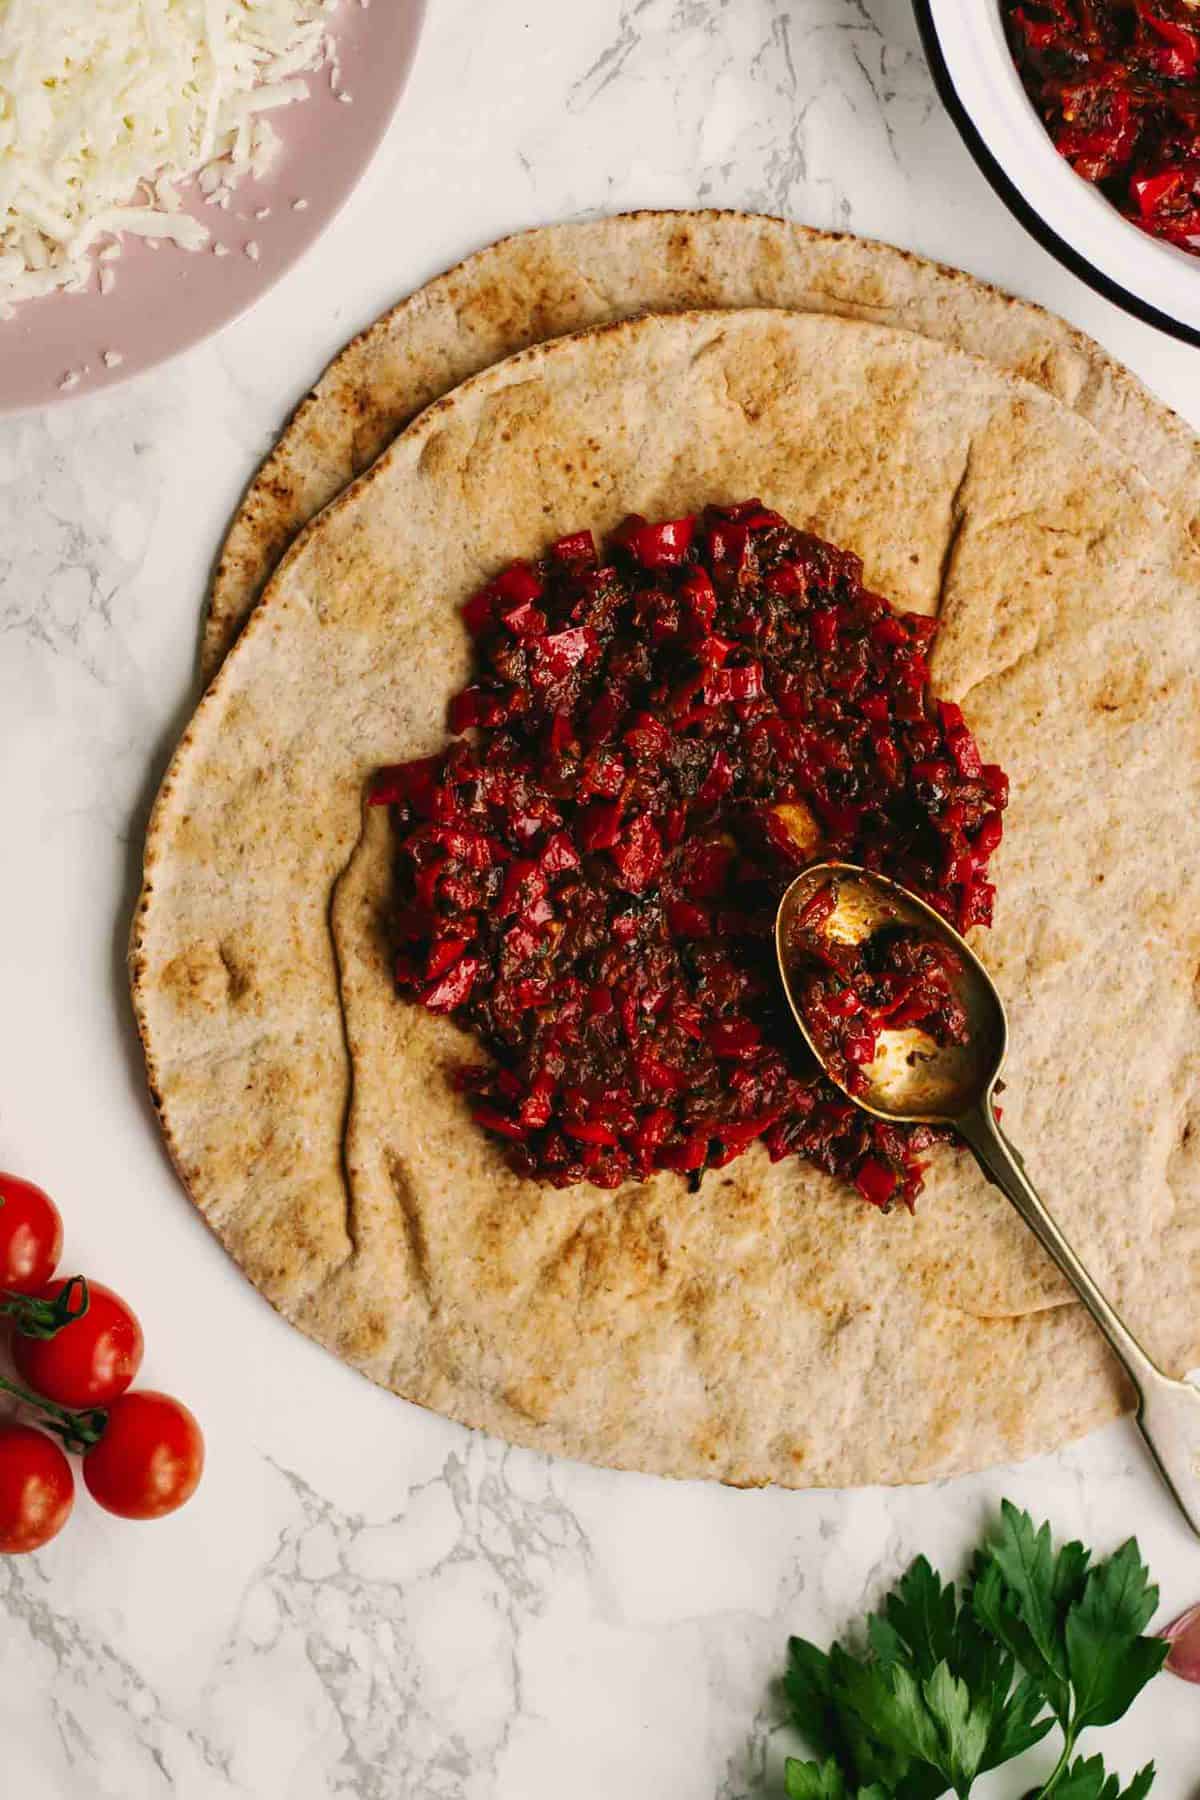 Harissa being spread on flatbread with a spoon.